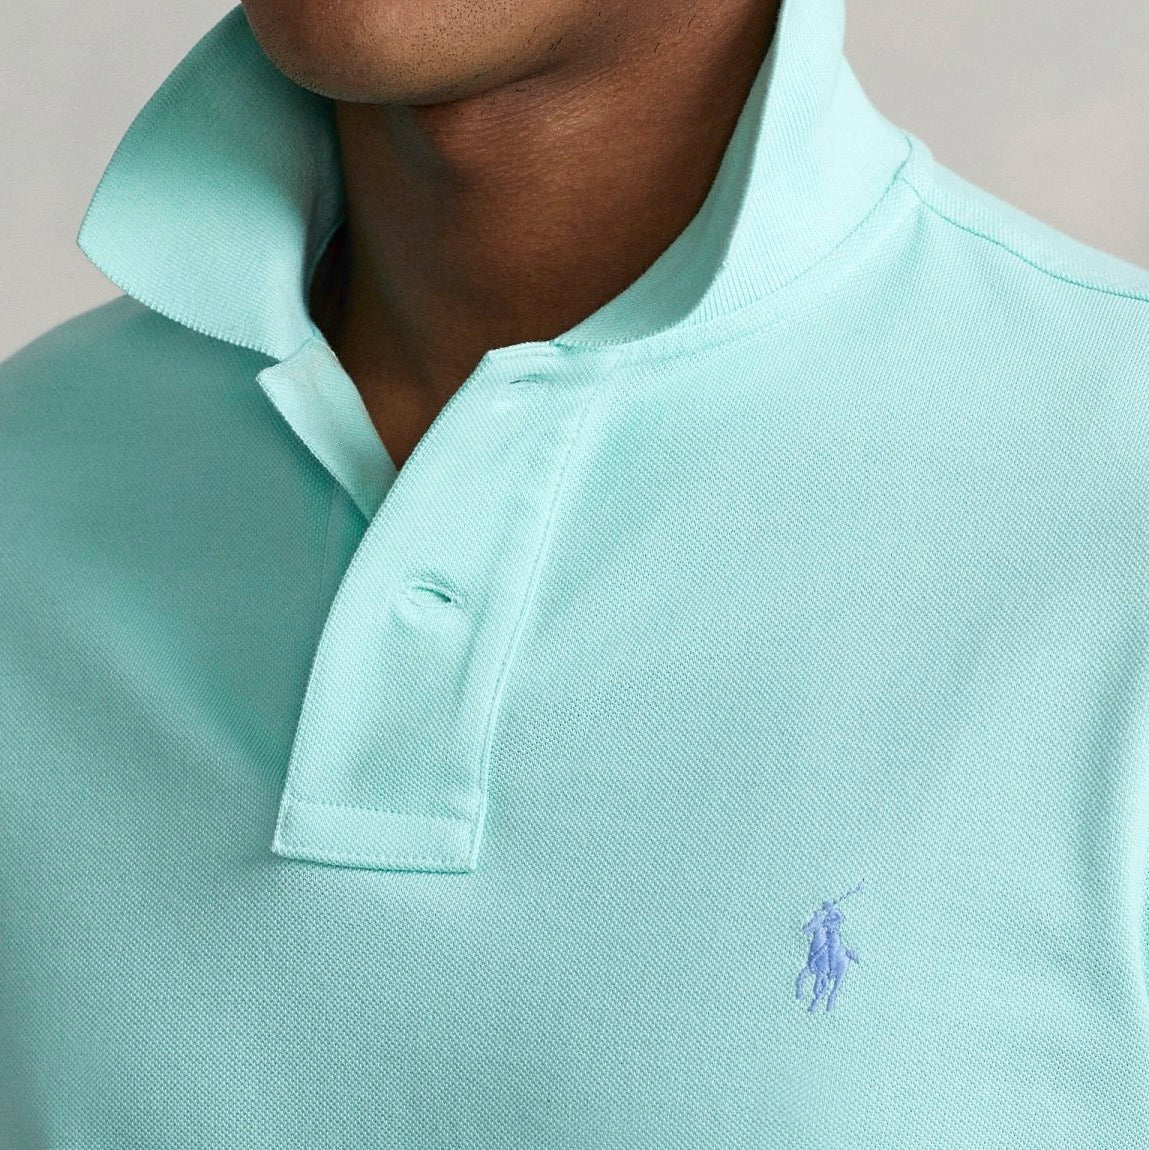 An American style standard since 1972, the Polo shirt has been imitated but never matched. Over the decades, Ralph Lauren has reimagined his signature style in a wide array of colors and fits, yet all retain the quality and attention to detail of the iconic original. This version is made from our highly breathable cotton mesh, which offers a textured look and a soft feel.